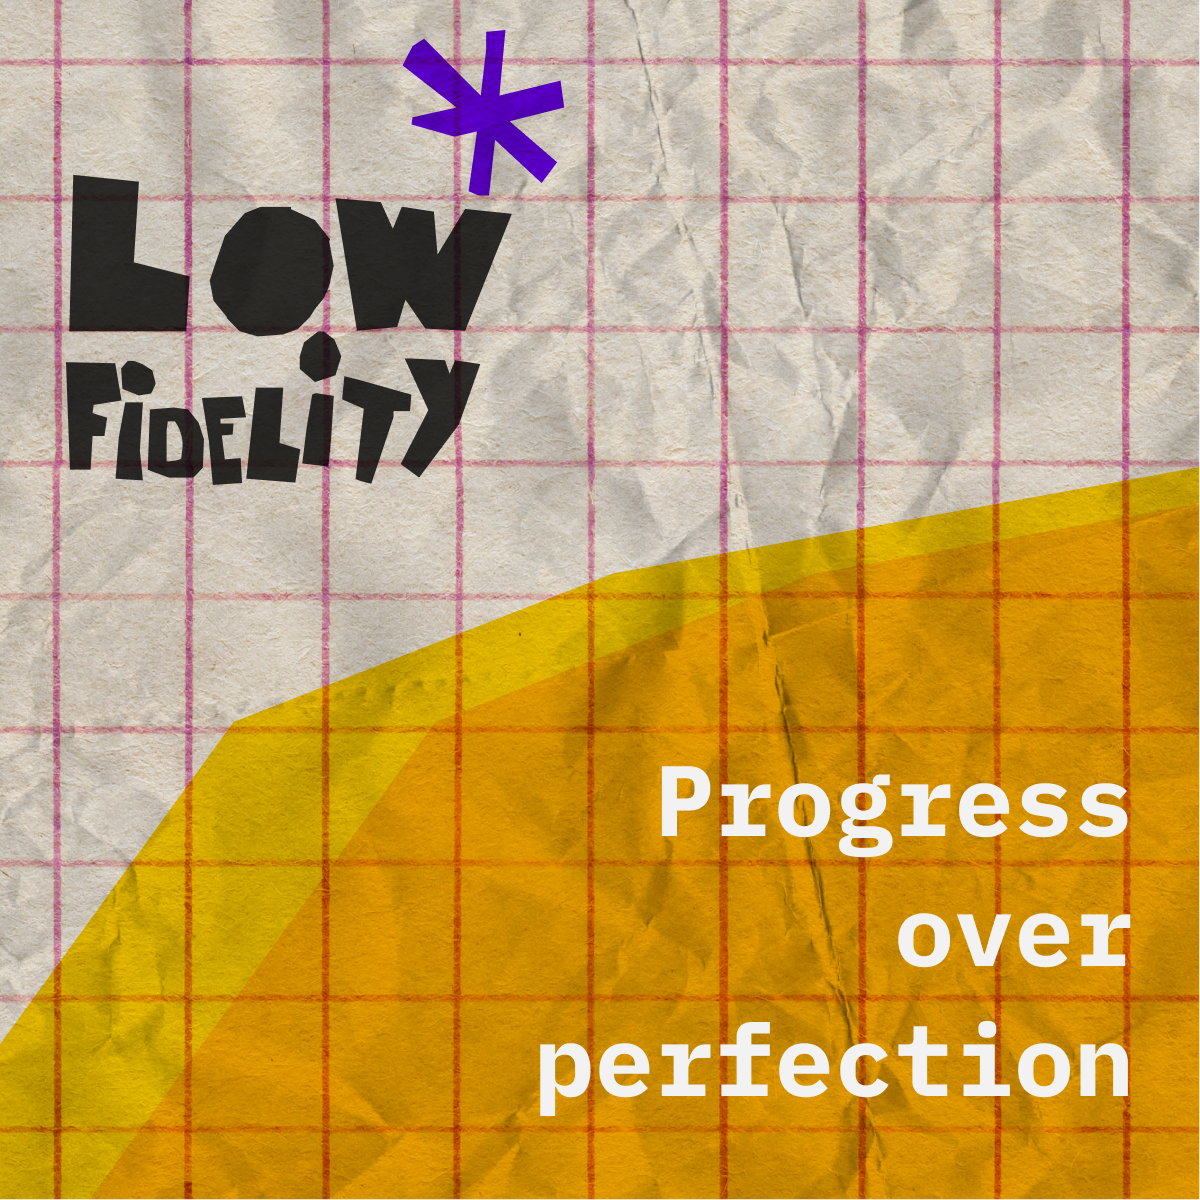 The words Progress over perfection and Low Fidelity on top of a paper texture and red grid lines